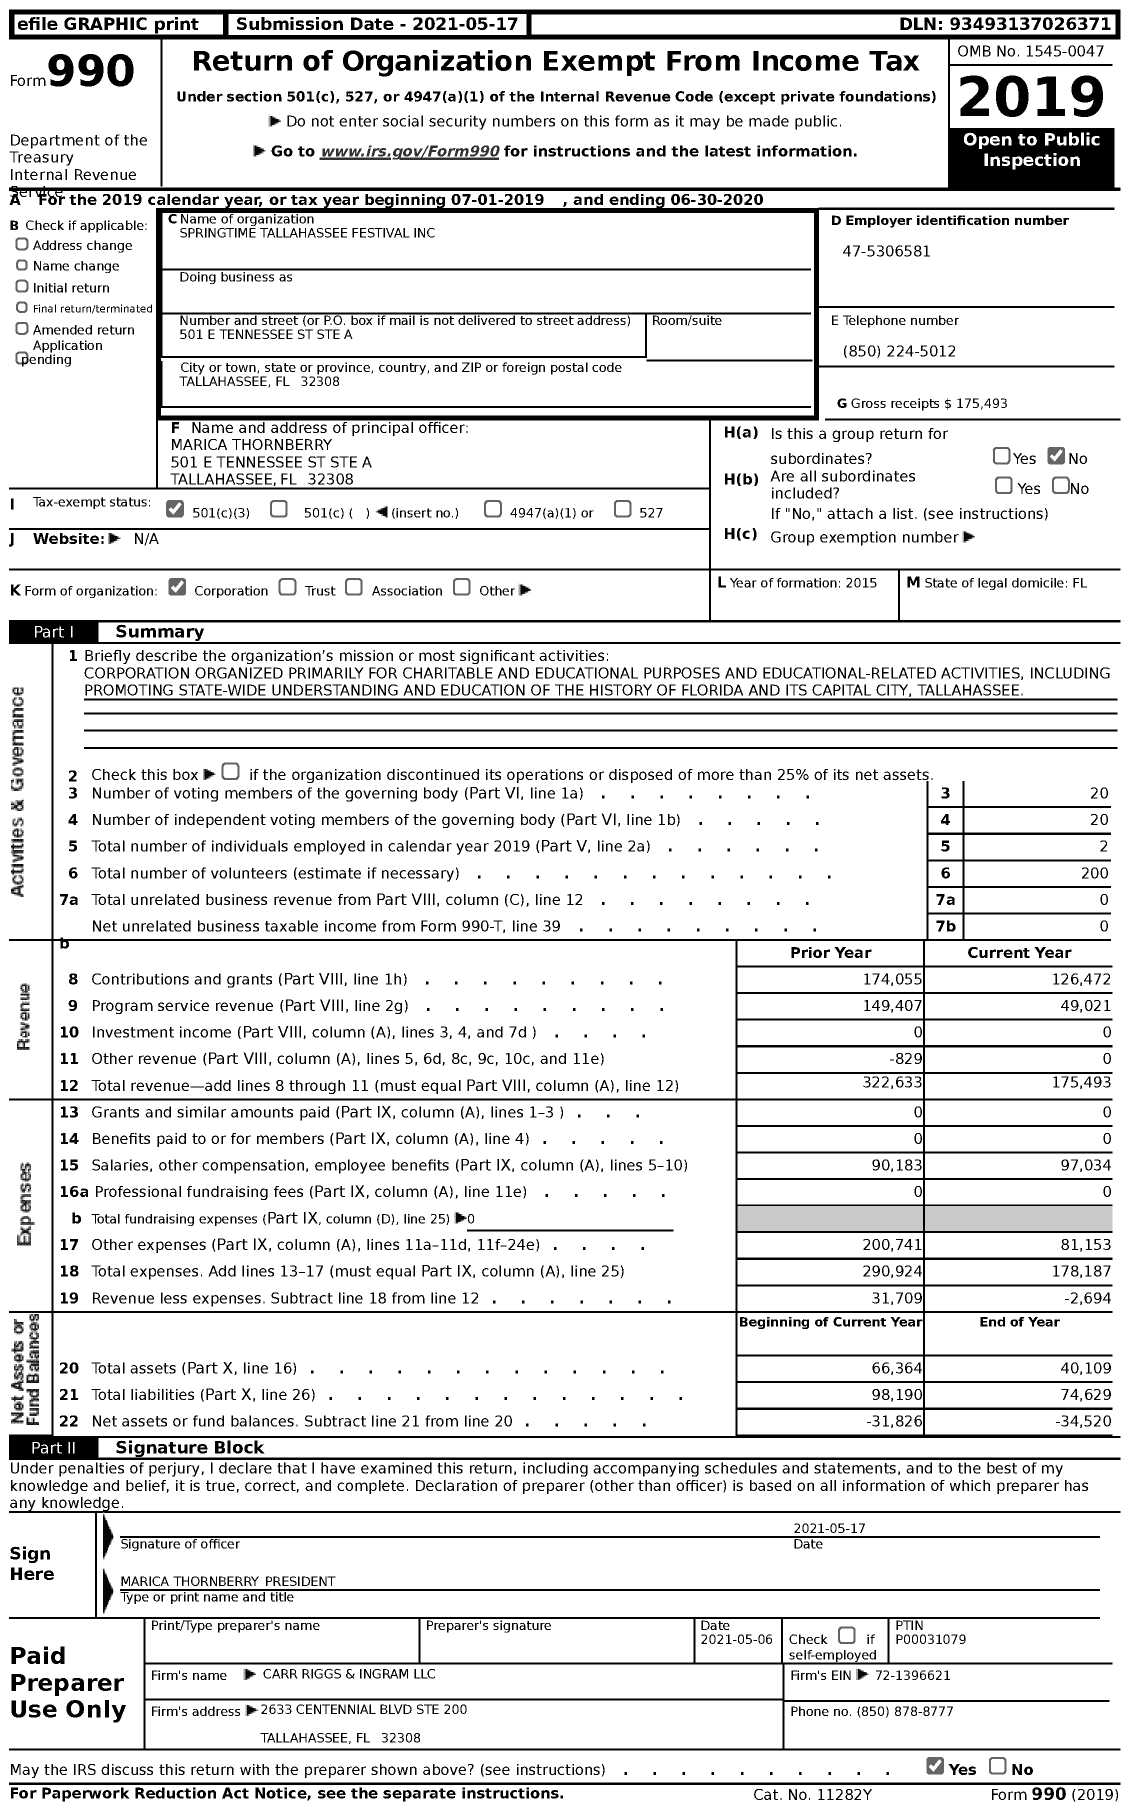 Image of first page of 2019 Form 990 for Springtime Tallahassee Festival